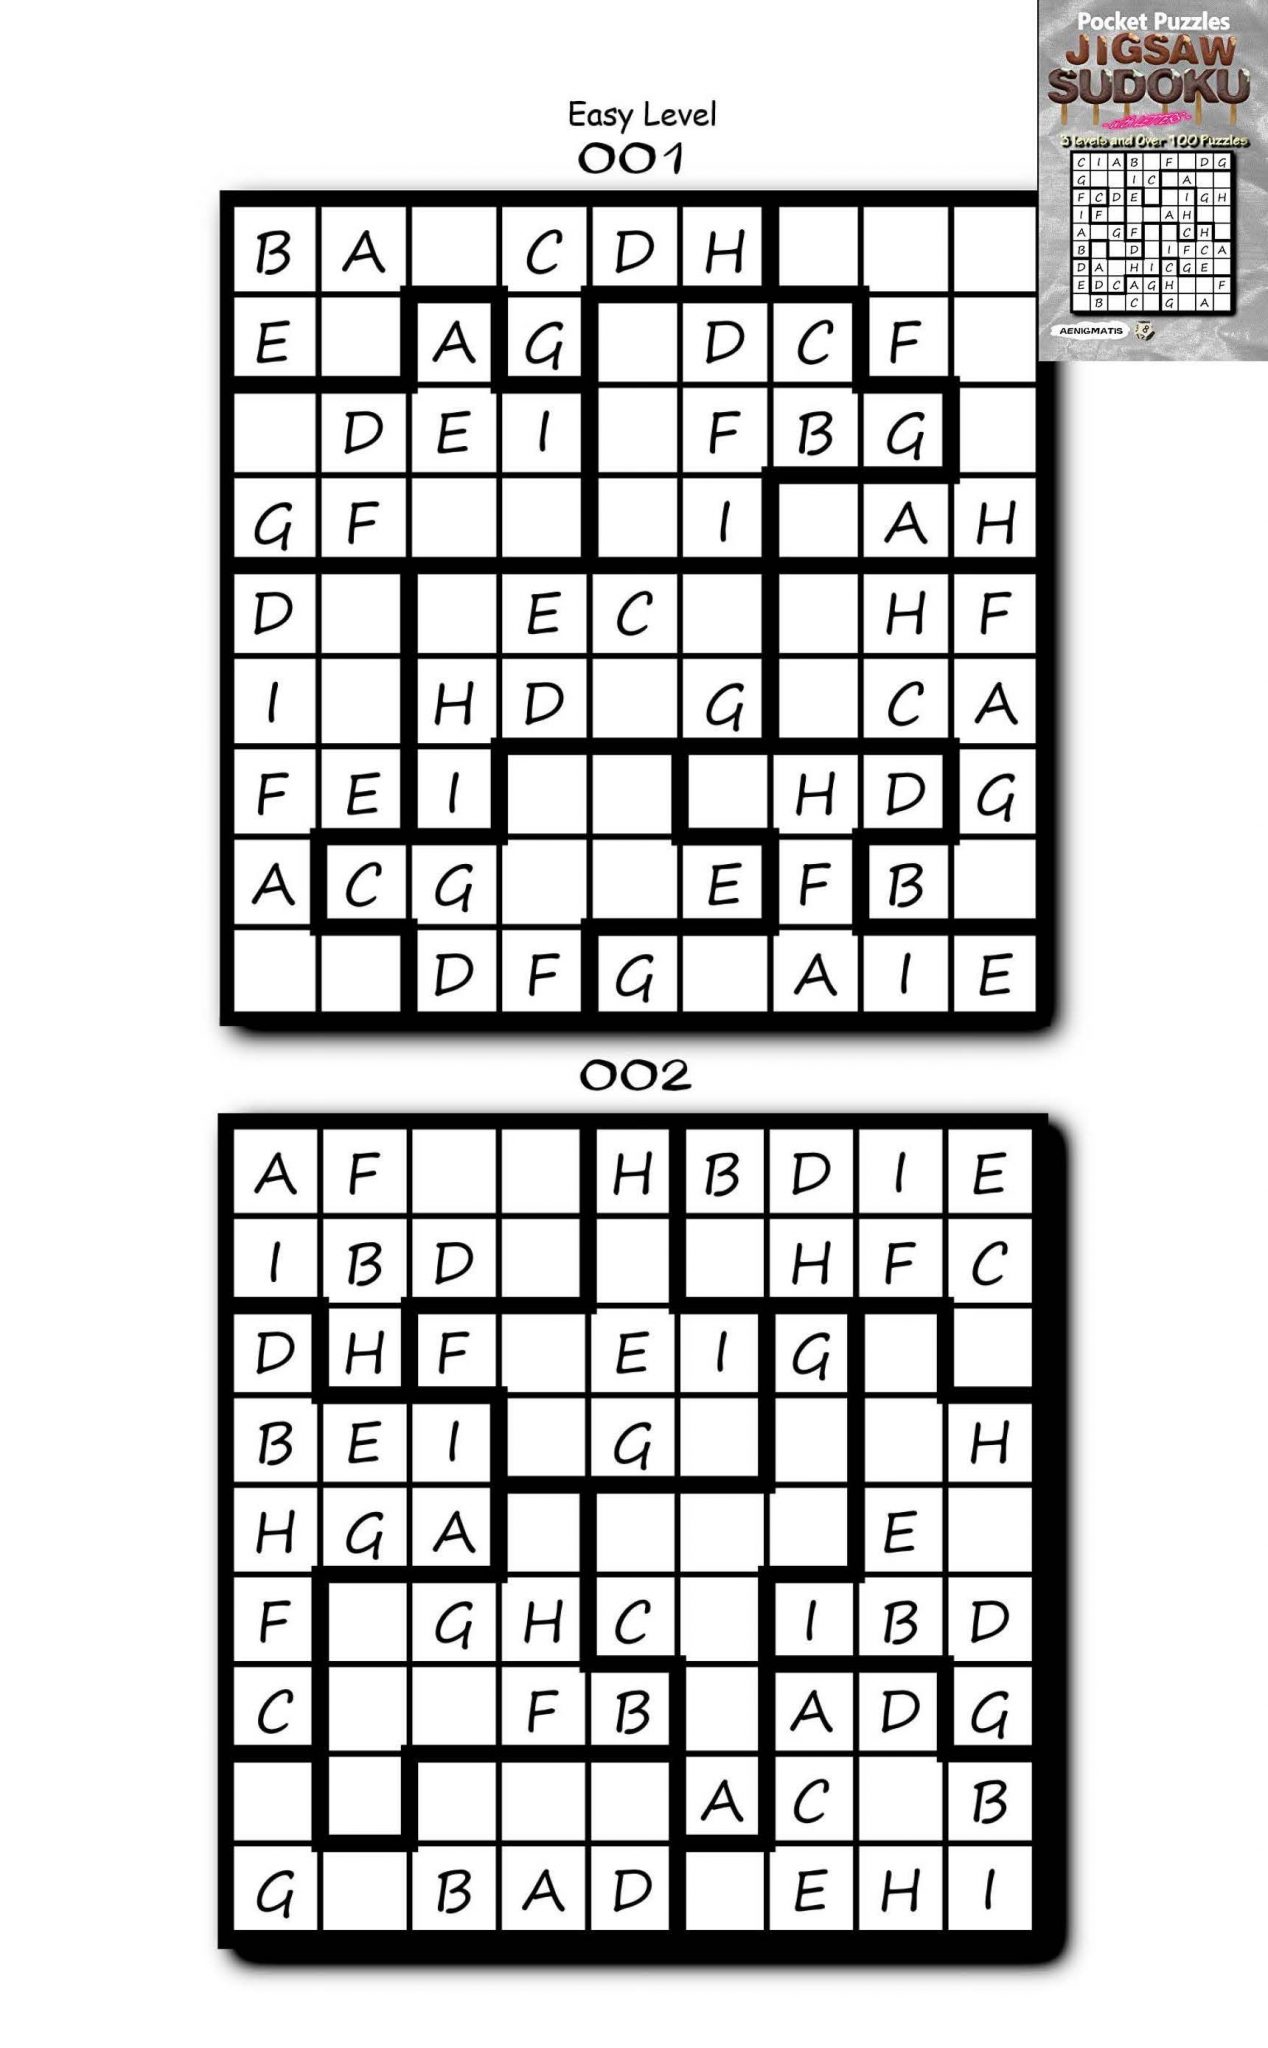 pocket puzzles jigsaw sudoku with letters 3 levels easy sudoku printable